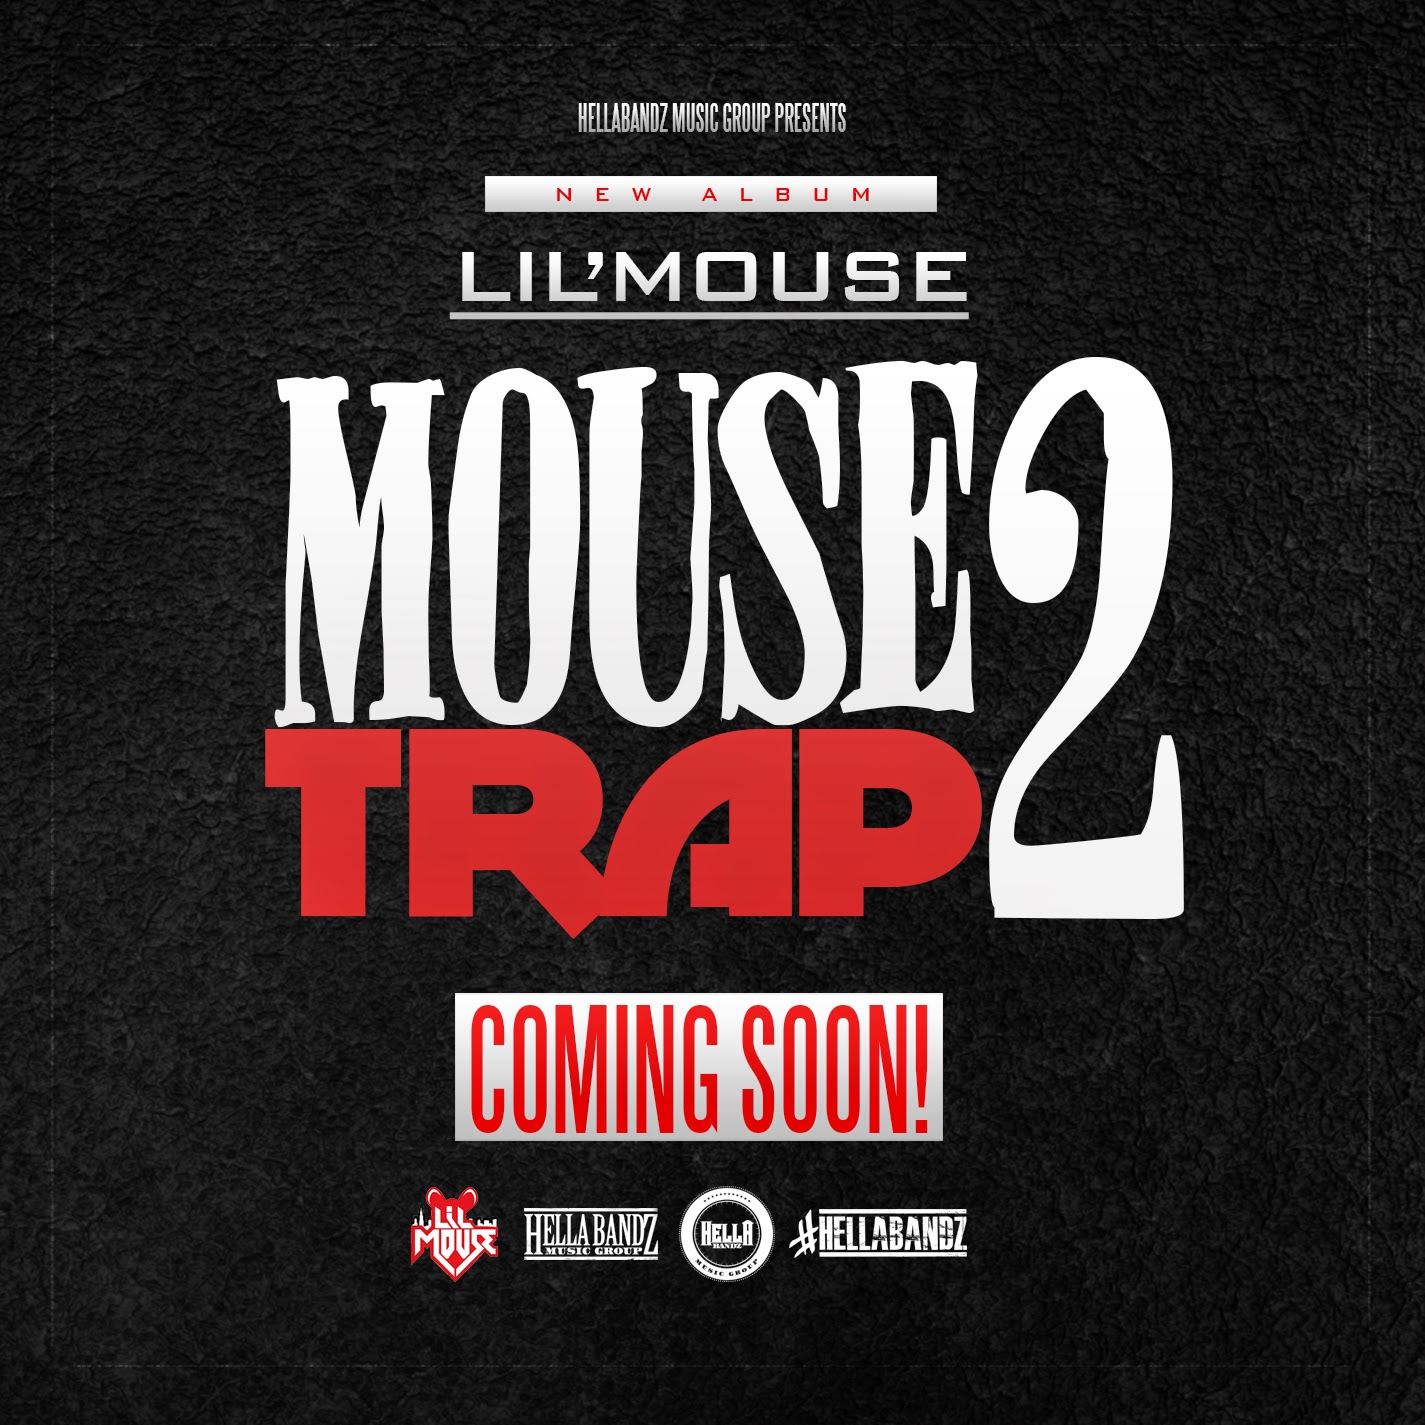 LIl Mouse - Mouse Trap 2 - COMING SOON!